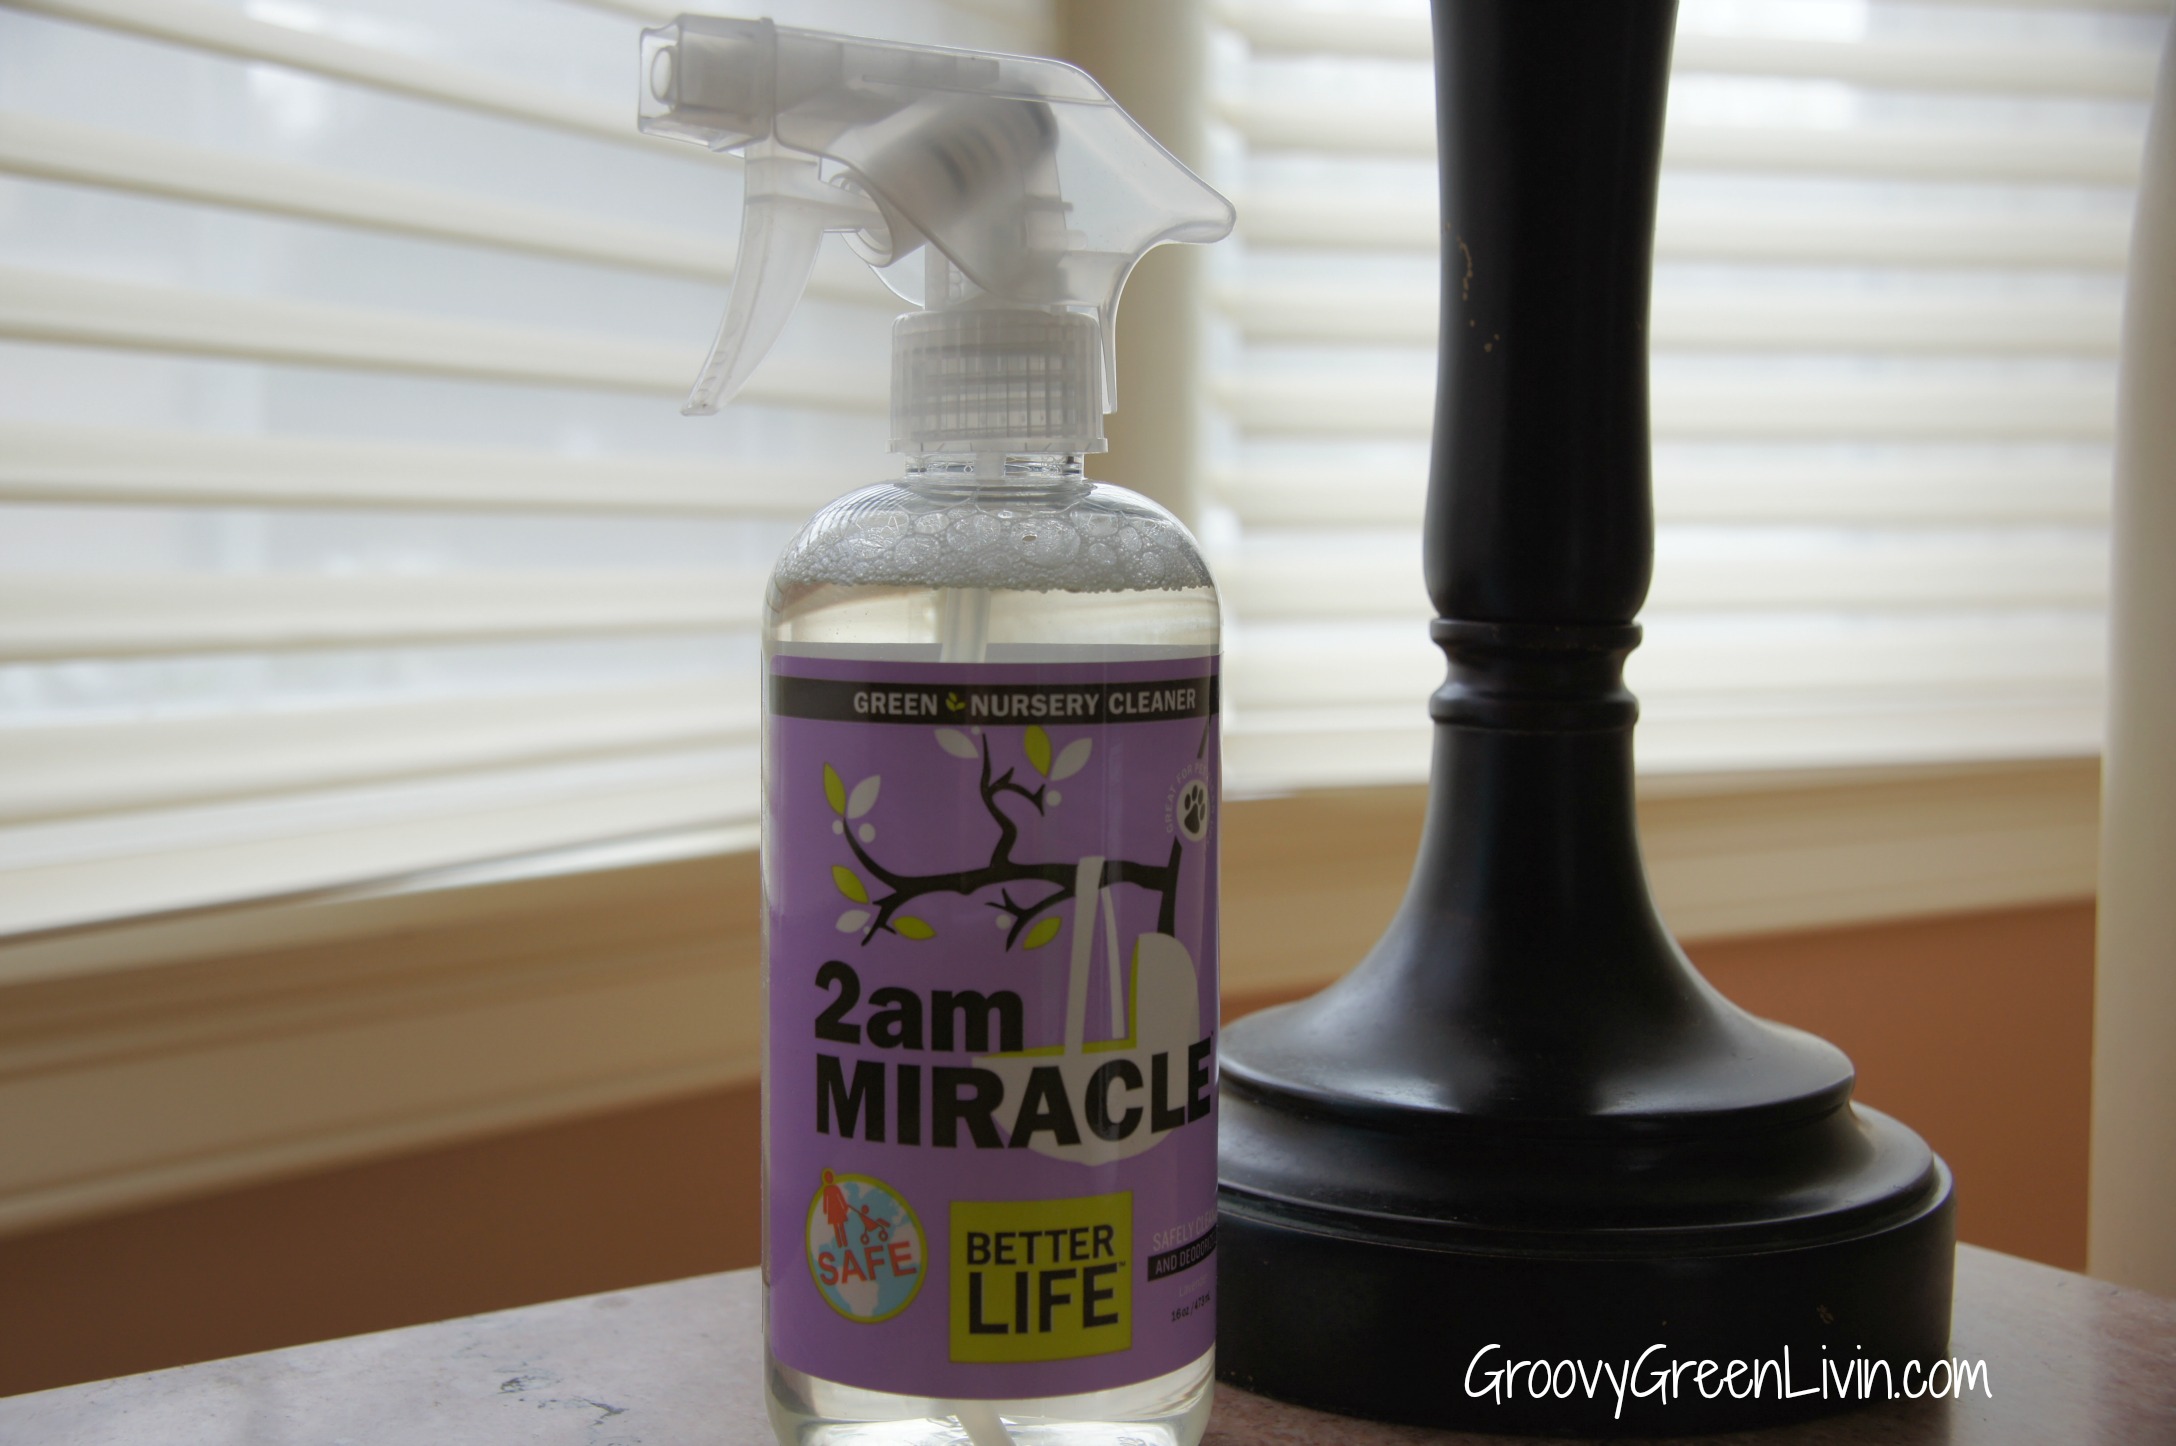 Groovy Green Livin non-toxic Cleaning products Better Life